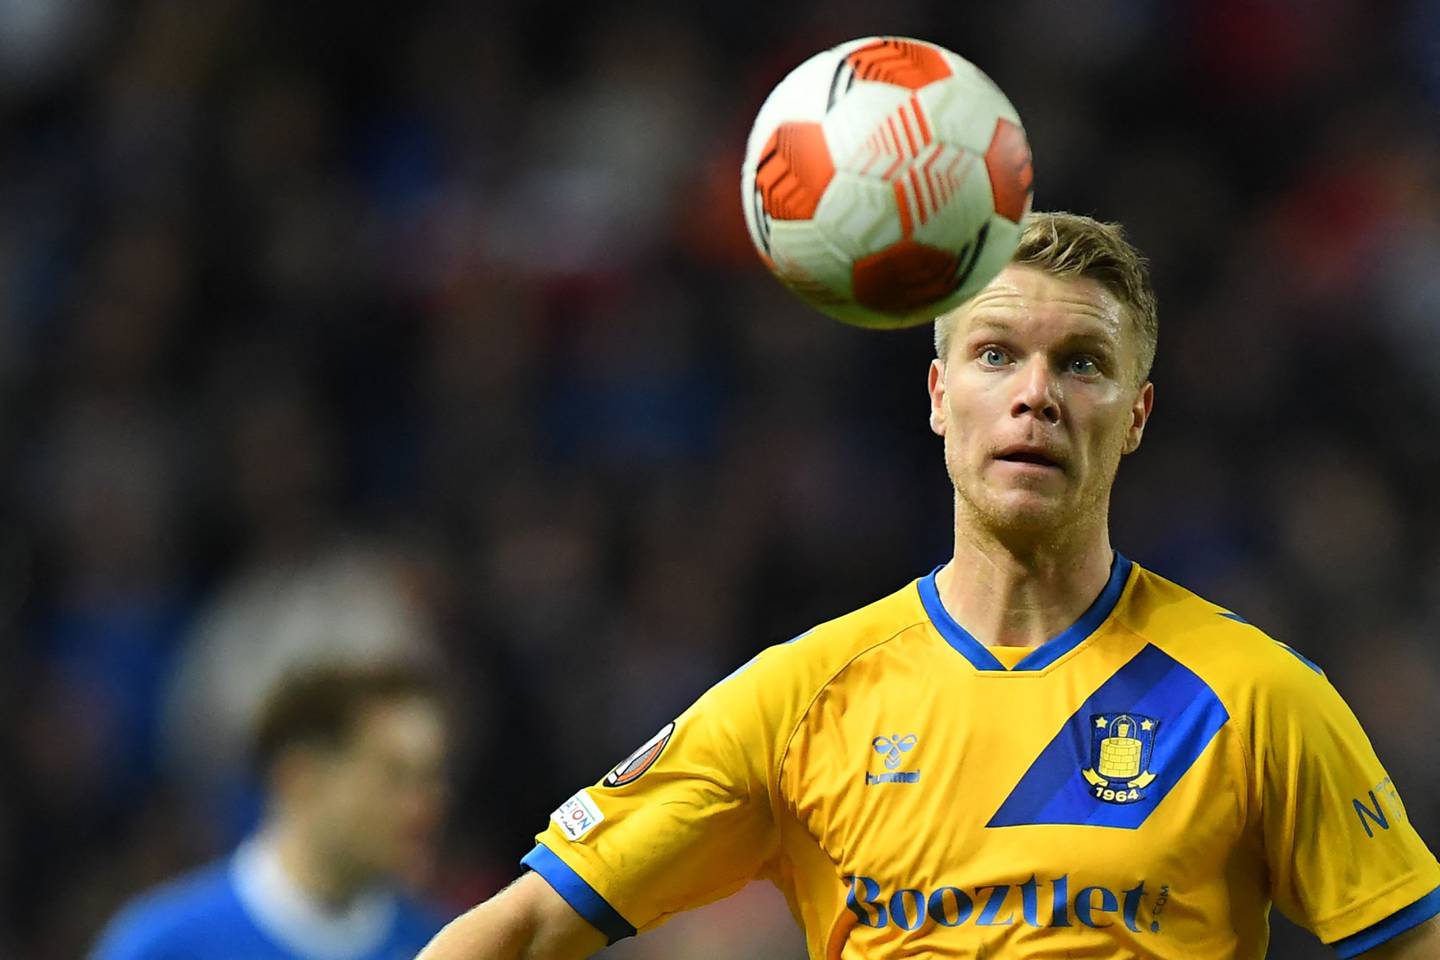 Brondby's Norwegian defender Sigurd Rosted keeps his eye on the ball during the UEFA Europa League group A football match between Rangers and Brondby at the Ibroxii Stadium in Glasgow on October 21, 2021. (Photo by ANDY BUCHANAN / AFP)